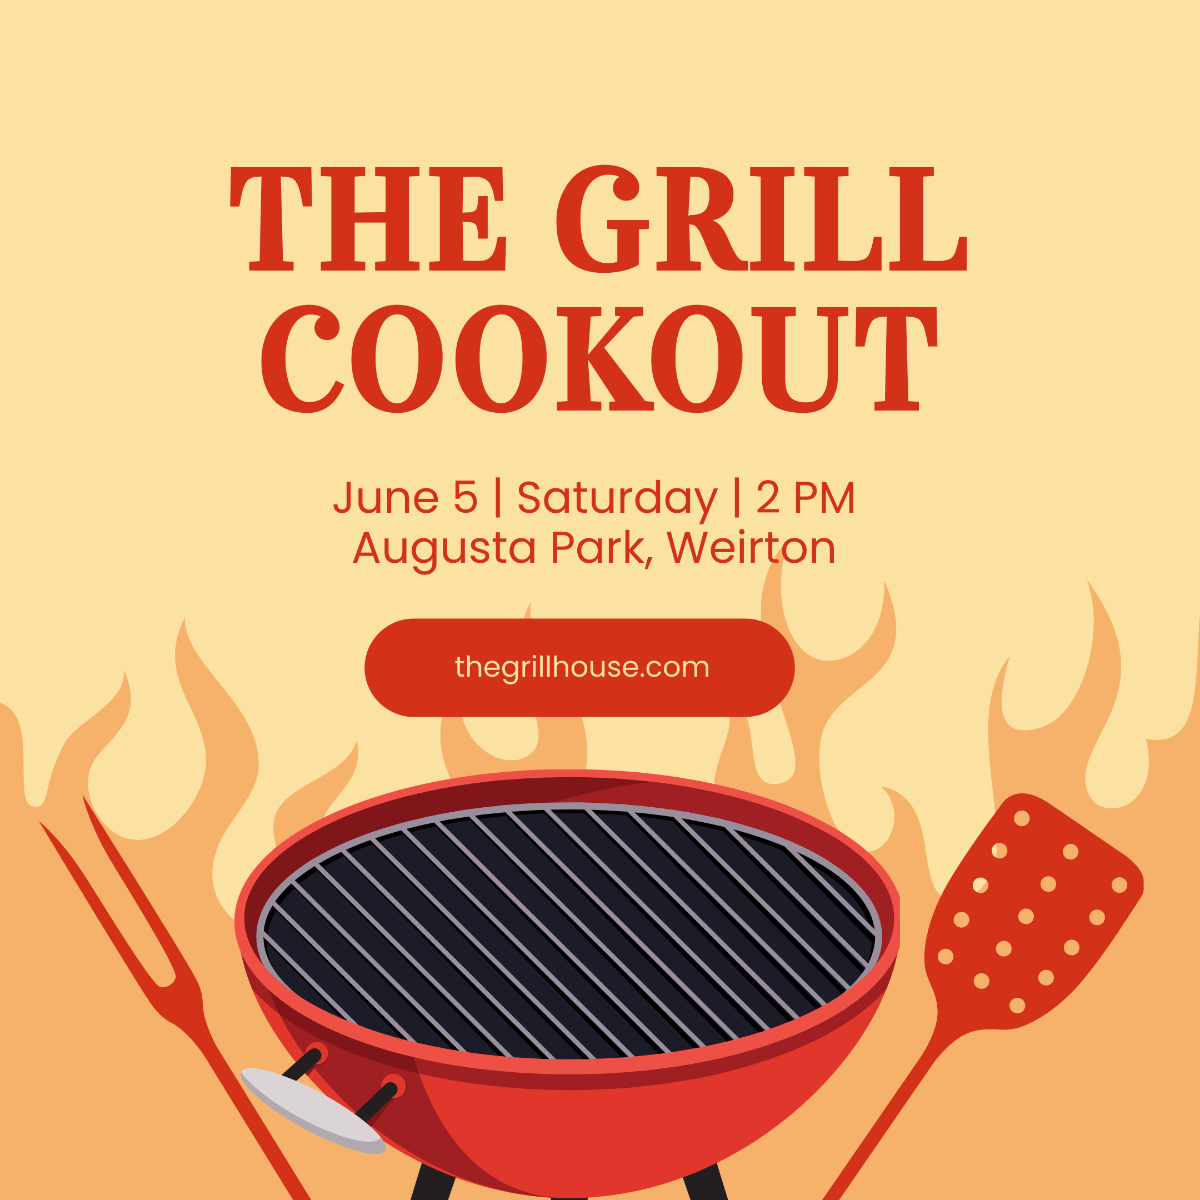 Free Grill Cookout Instagram Post Template